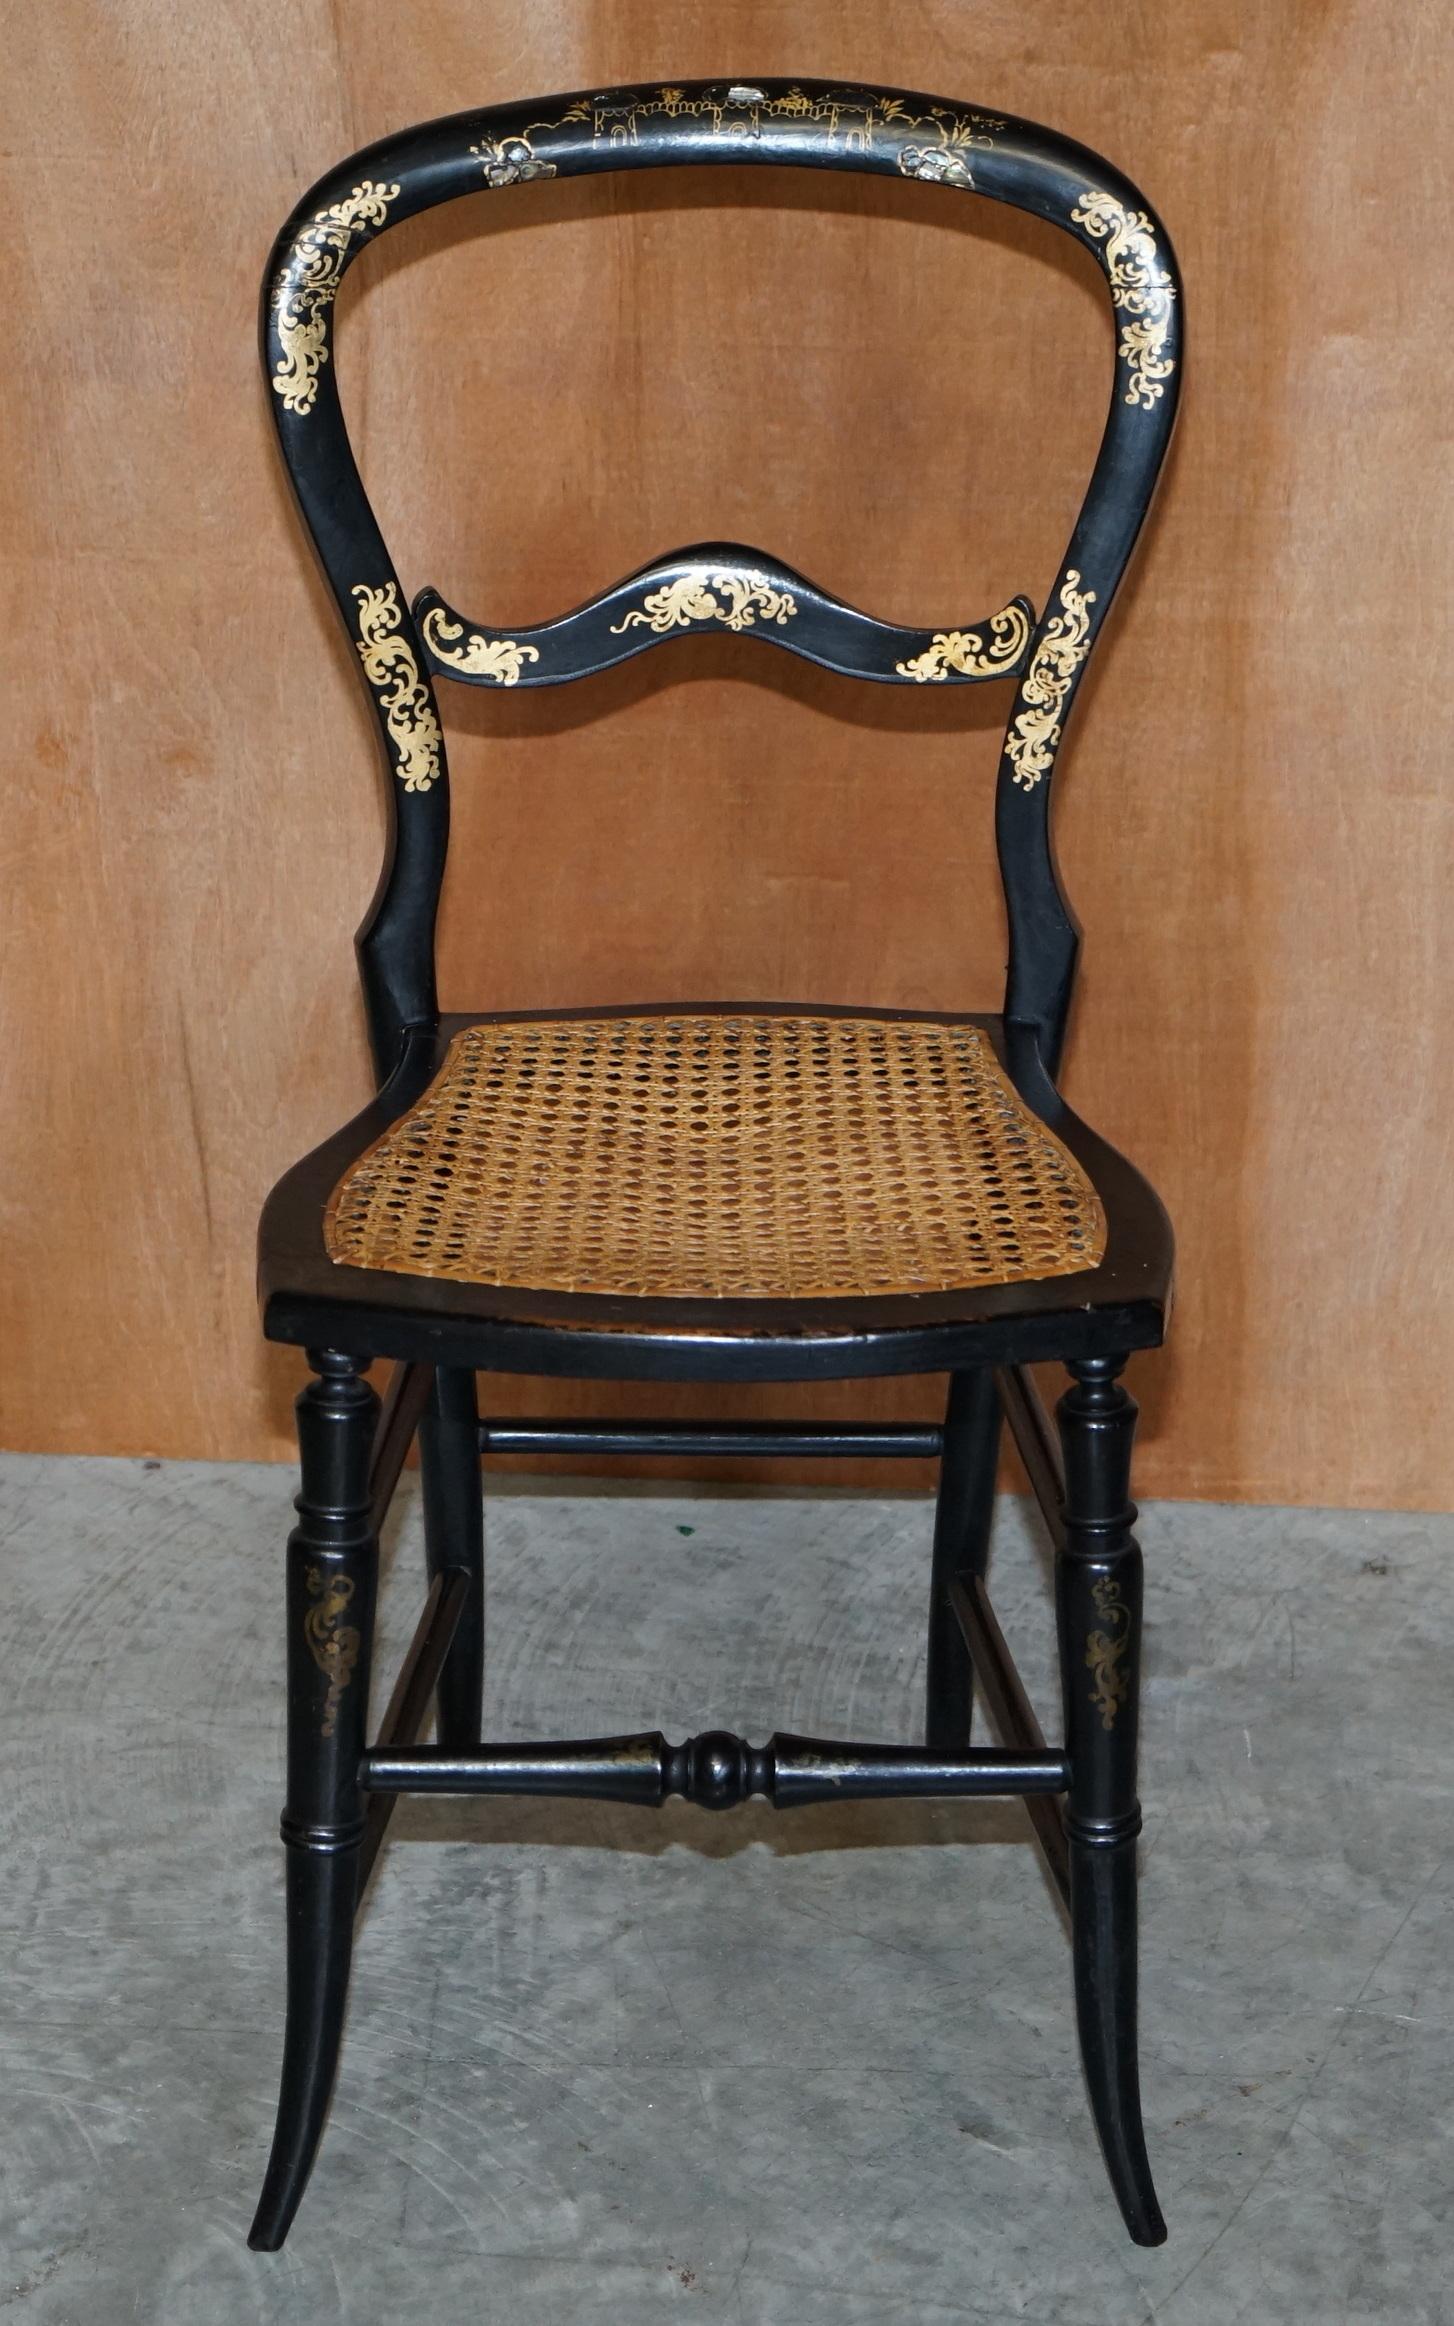 We are delighted to offer for sale this exquisite original circa 1815 Regency ebonised gold leaf painted and mother of pearl inlaid occasional bergere chair

A very good looking well made and decorative chairs, this is a good collectors find, not